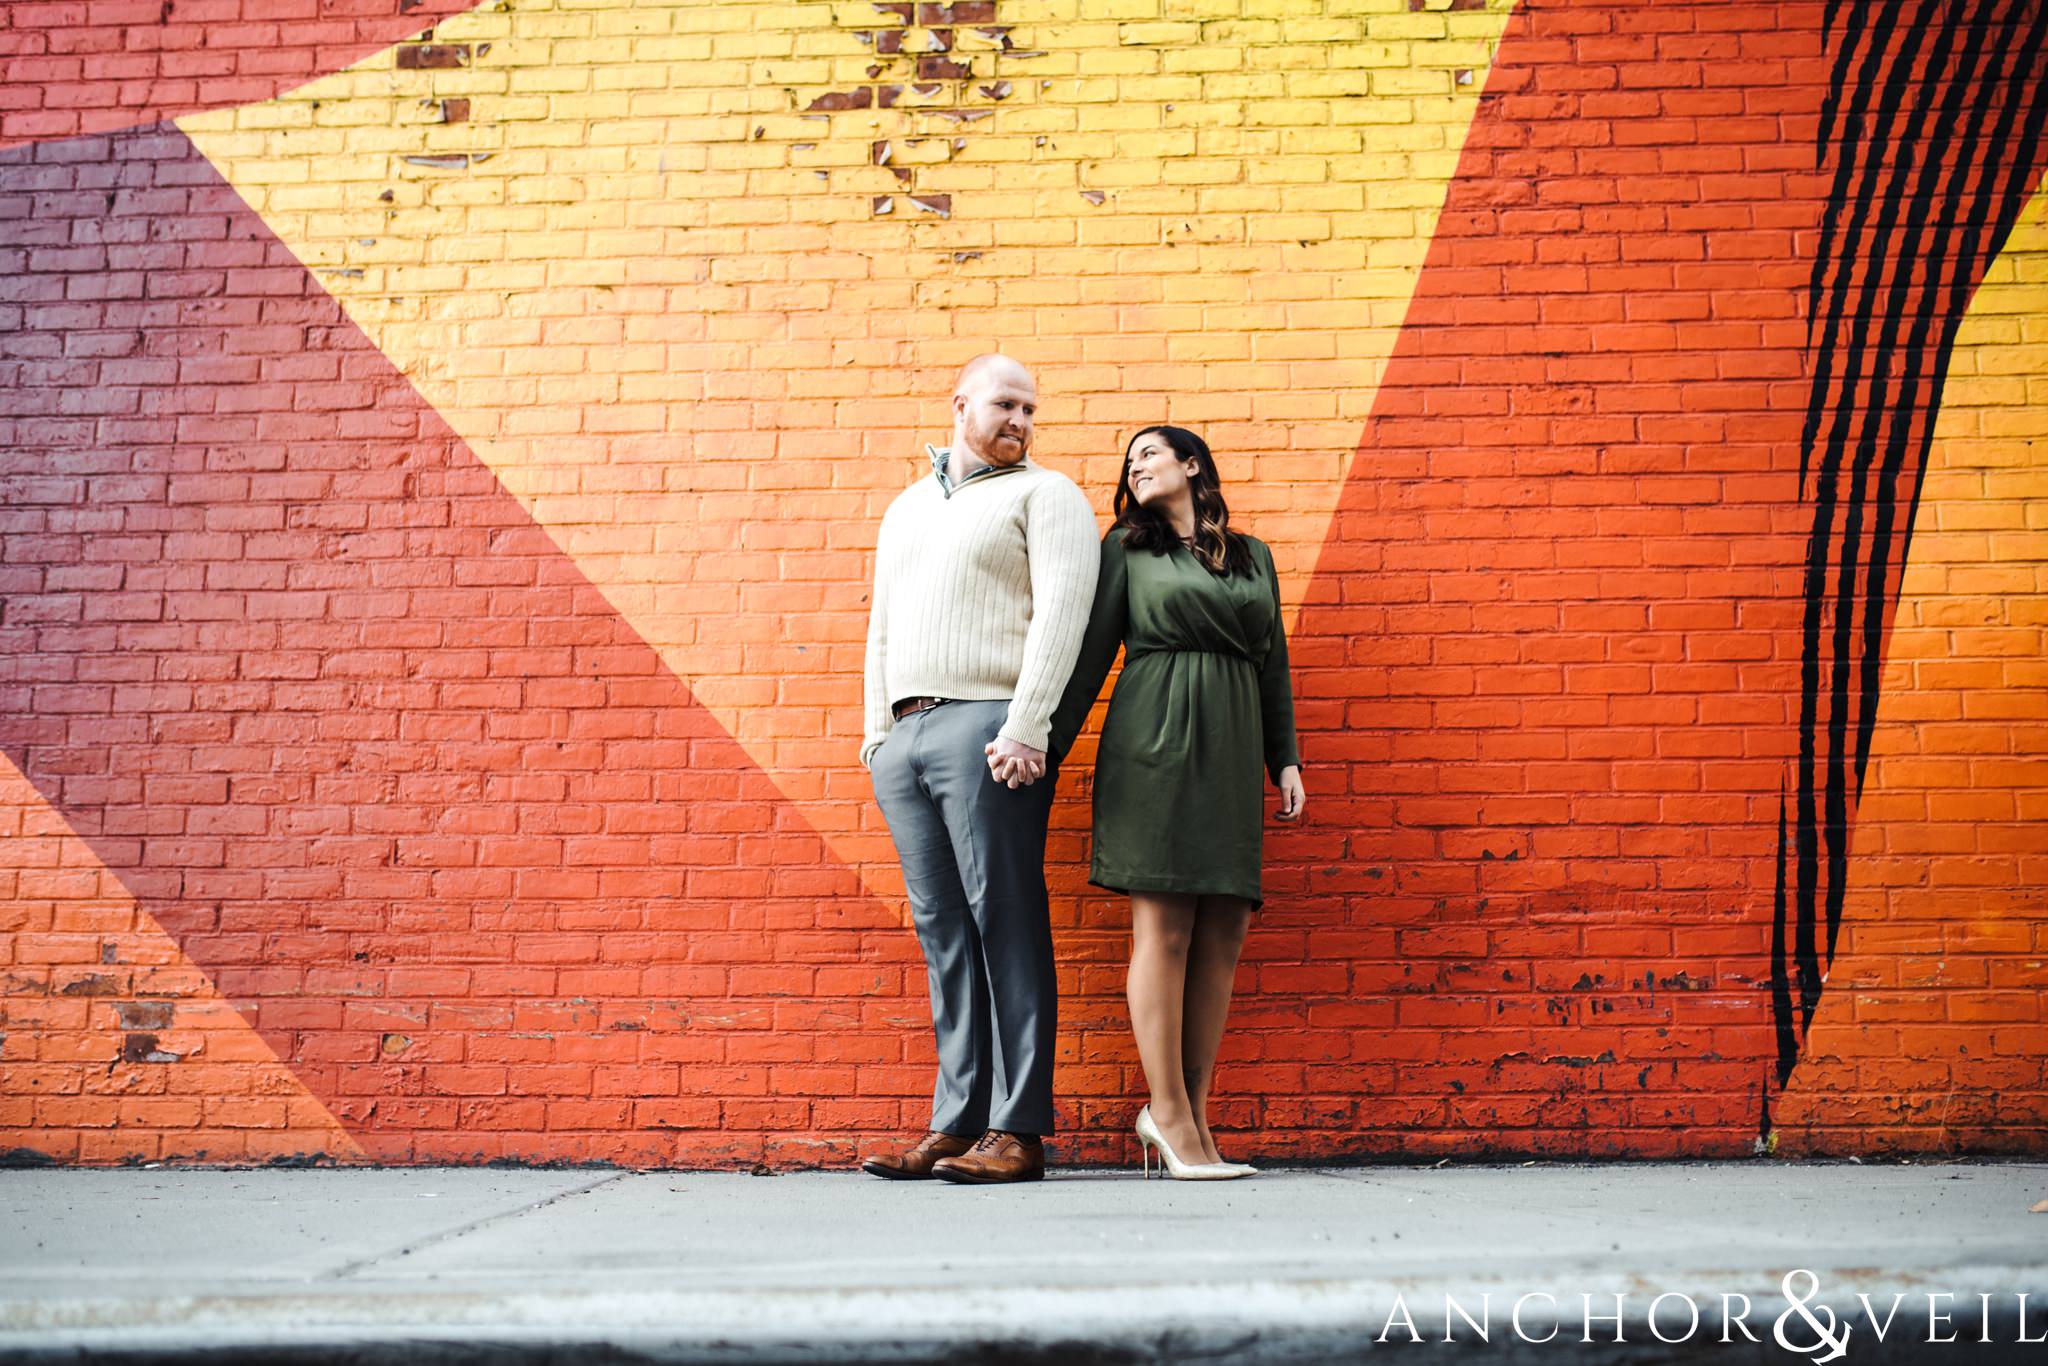 triangles and the colors mural During their Dumbo Brooklyn New York engagement session